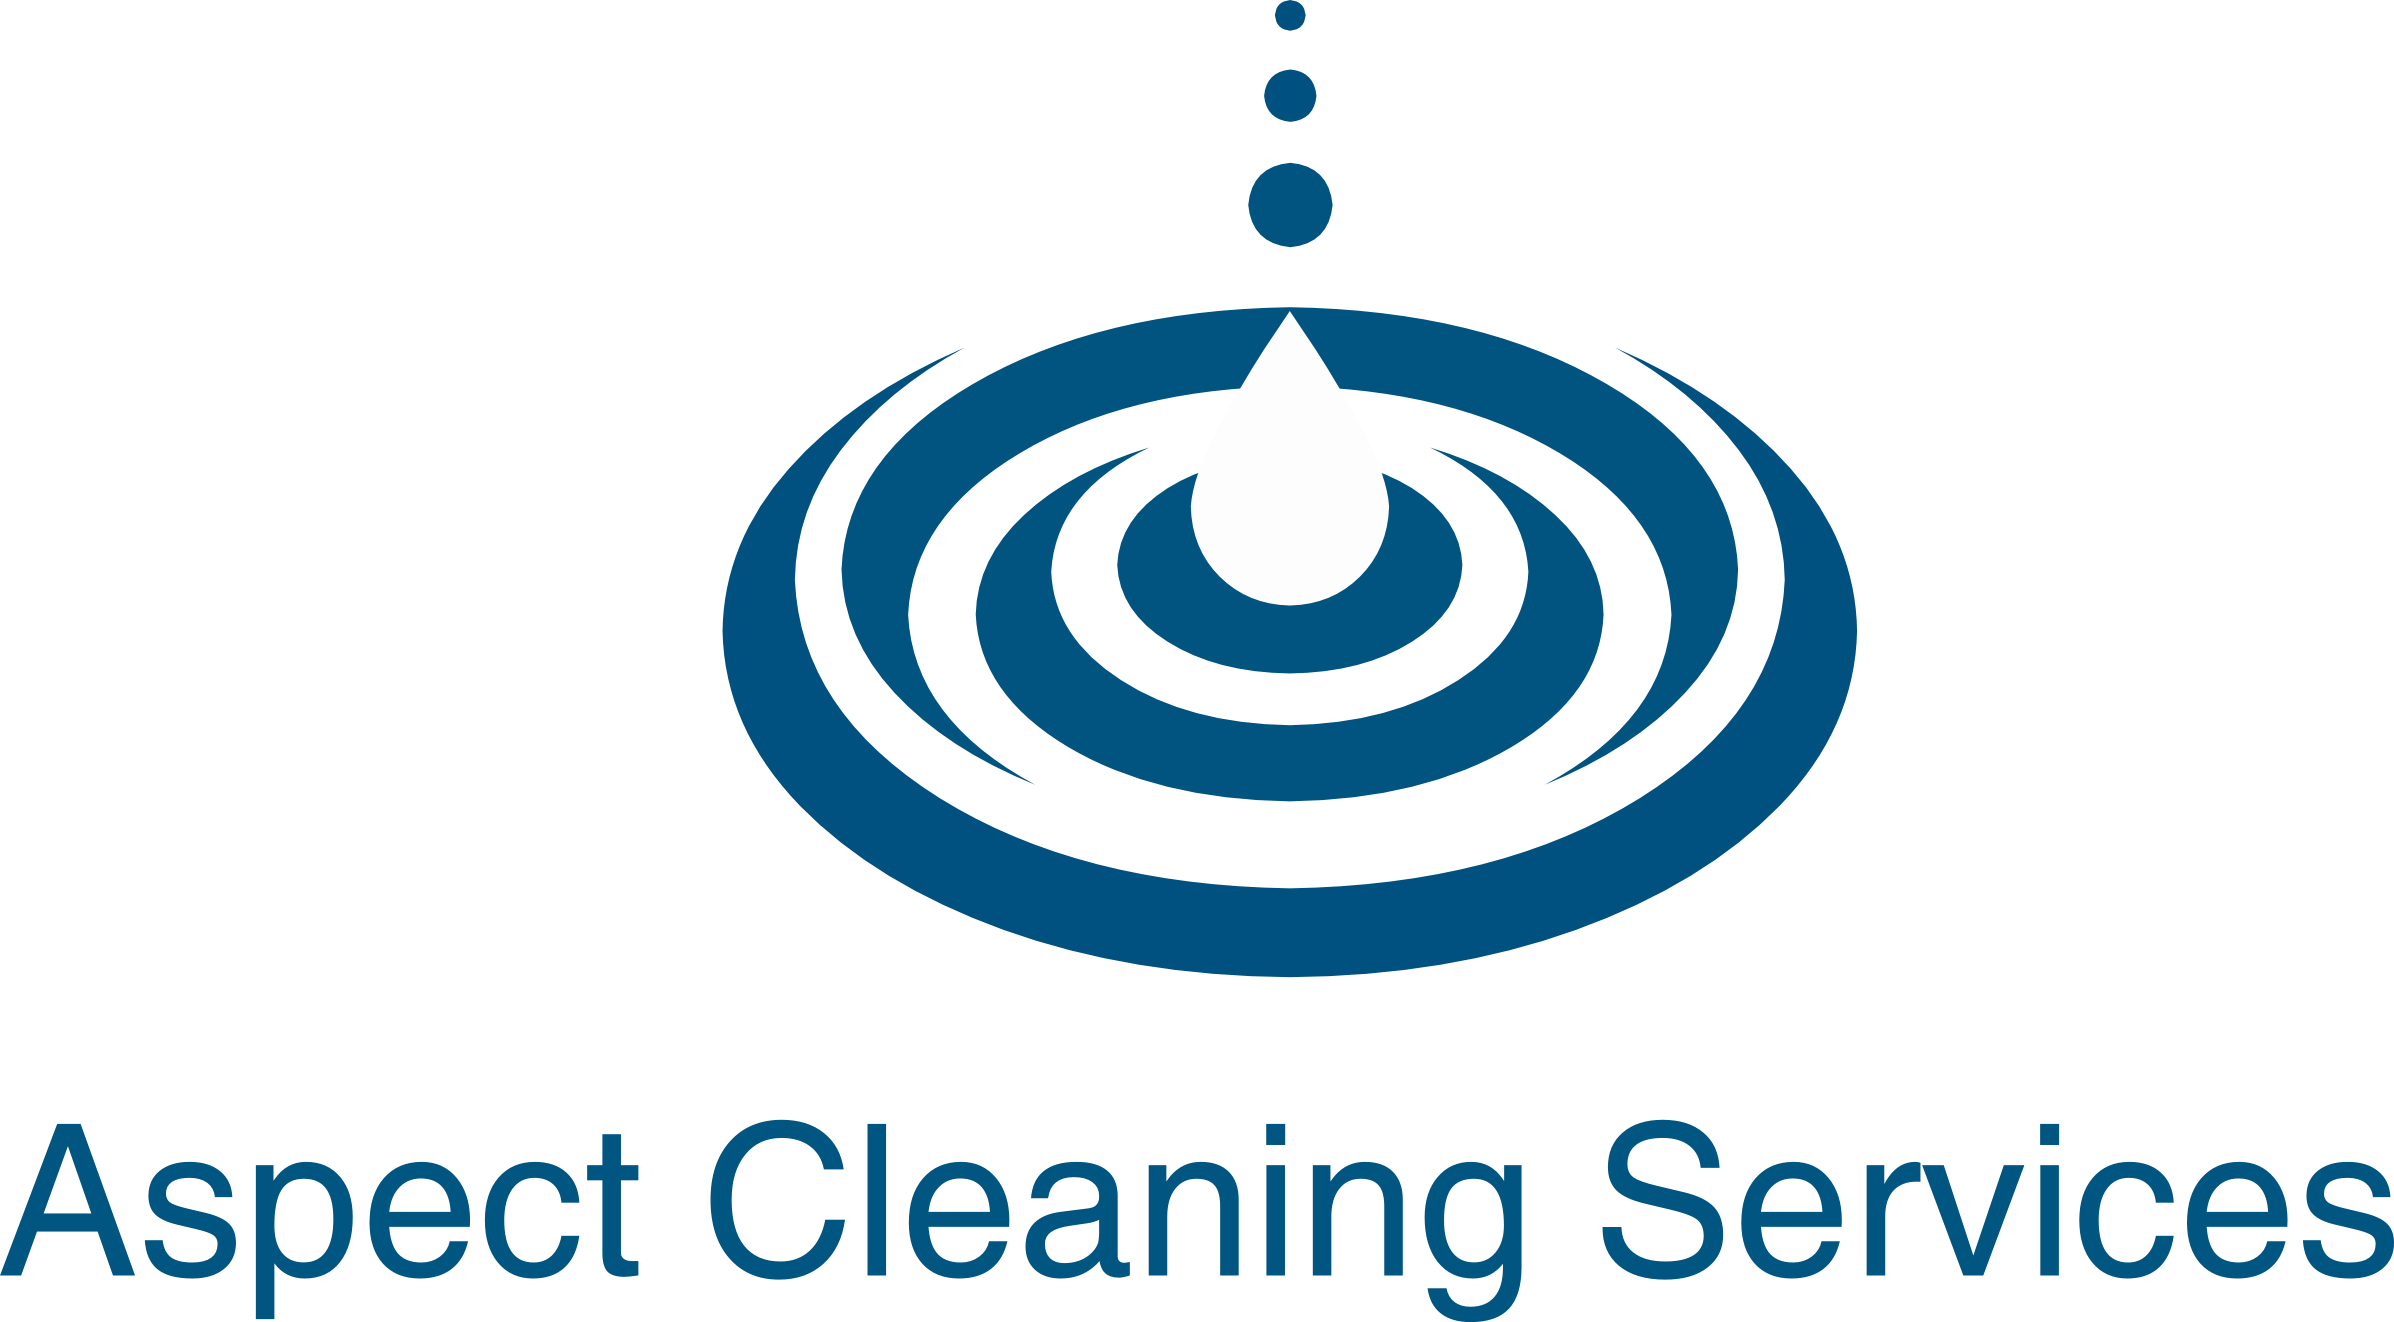 Apsect Cleaning Services